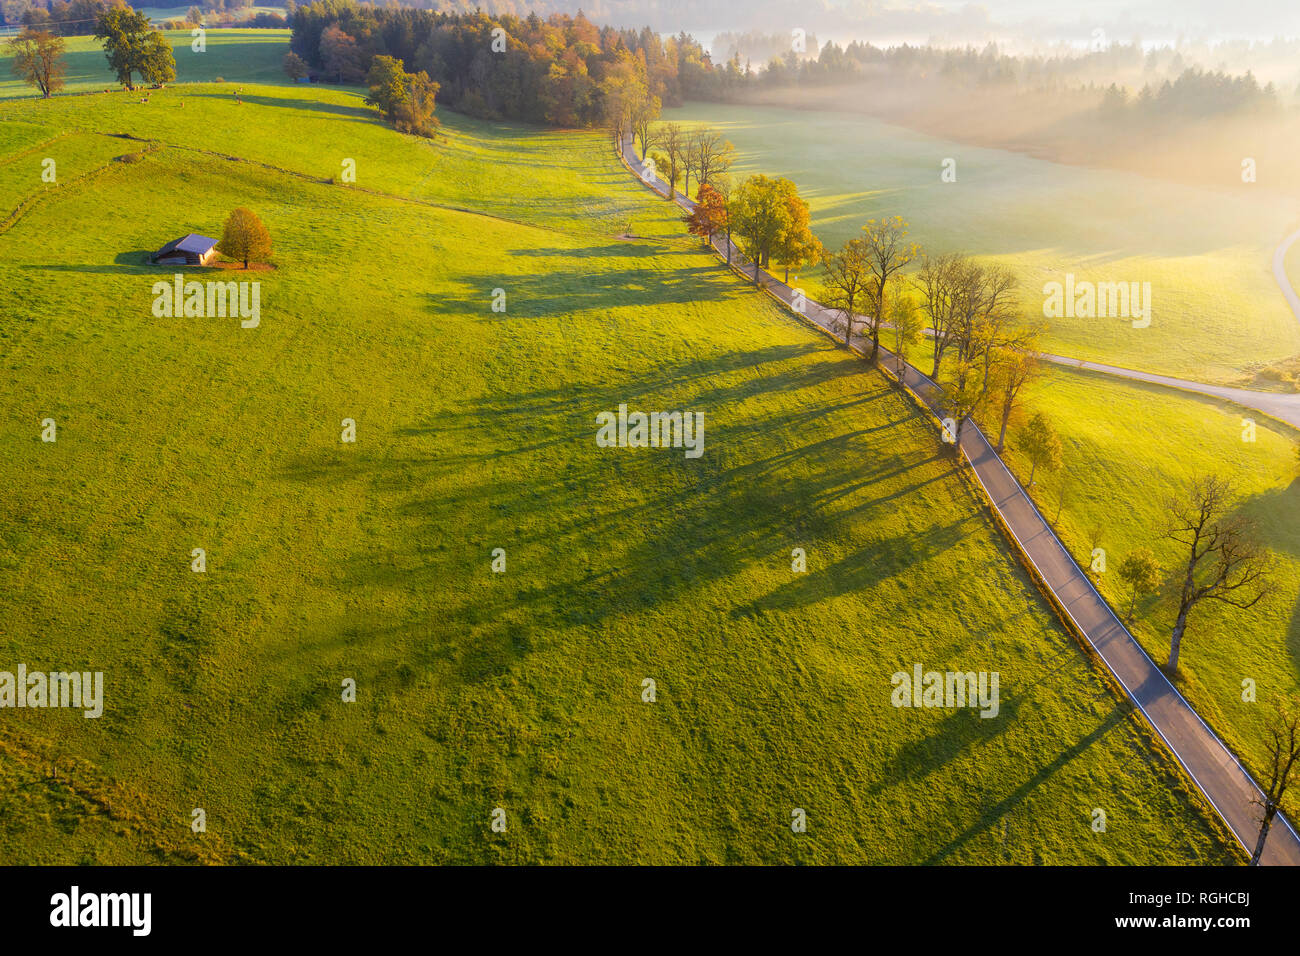 Germany, Bavaria, Upper Bavaria, Dietramszell, Aerial view of alley in the morning light Stock Photo